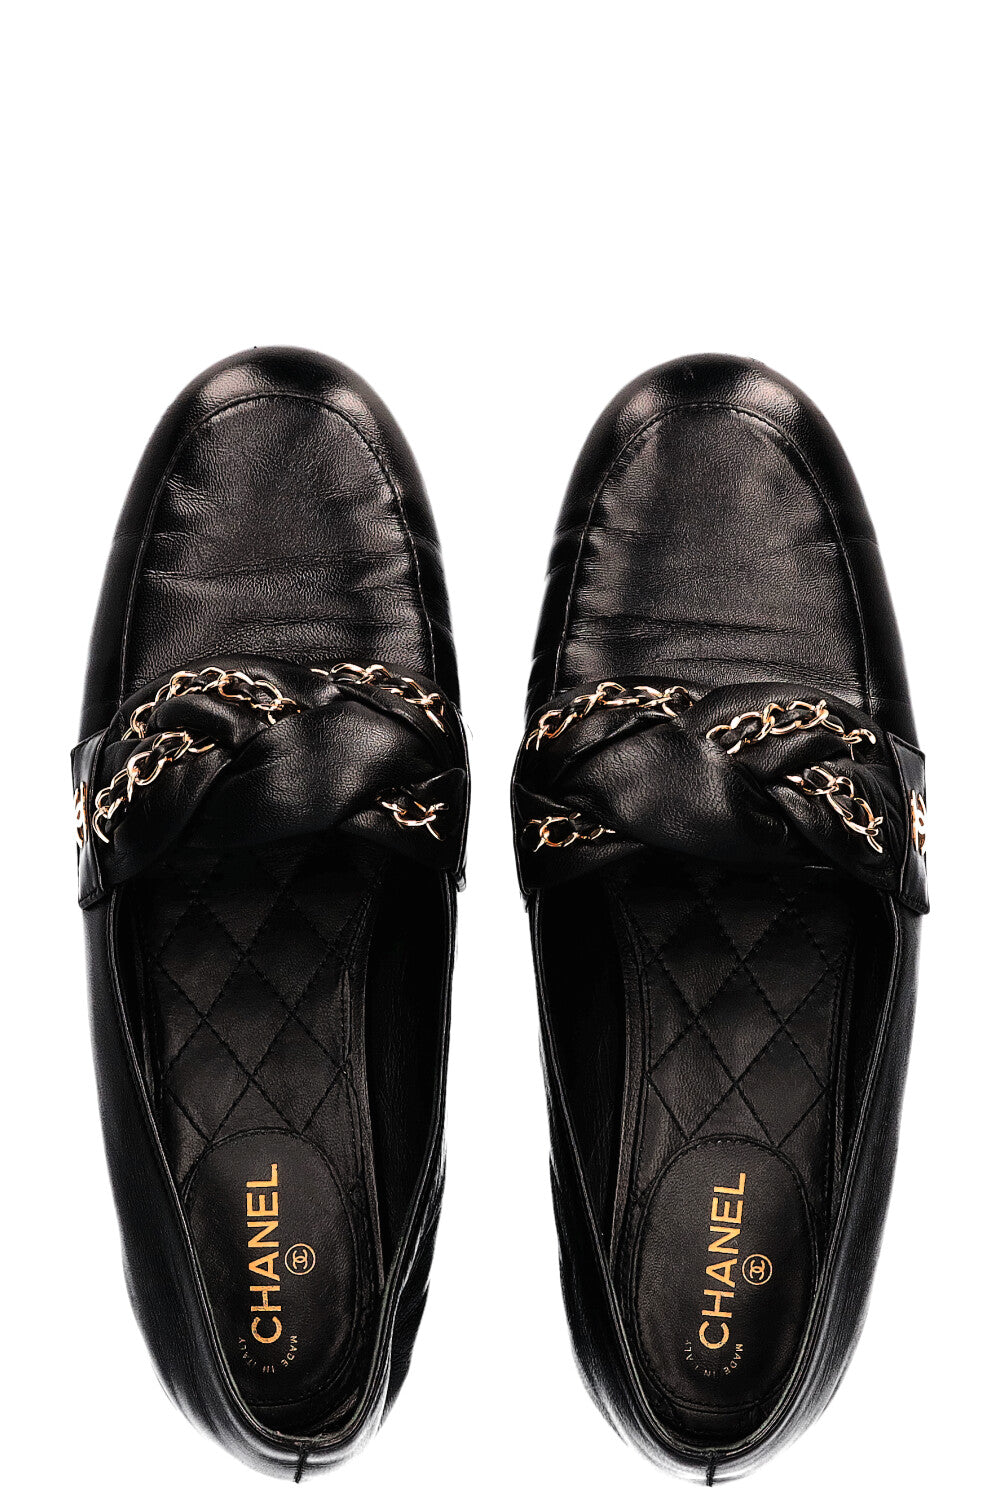 CHANEL Braided Chain Loafers Flats Black